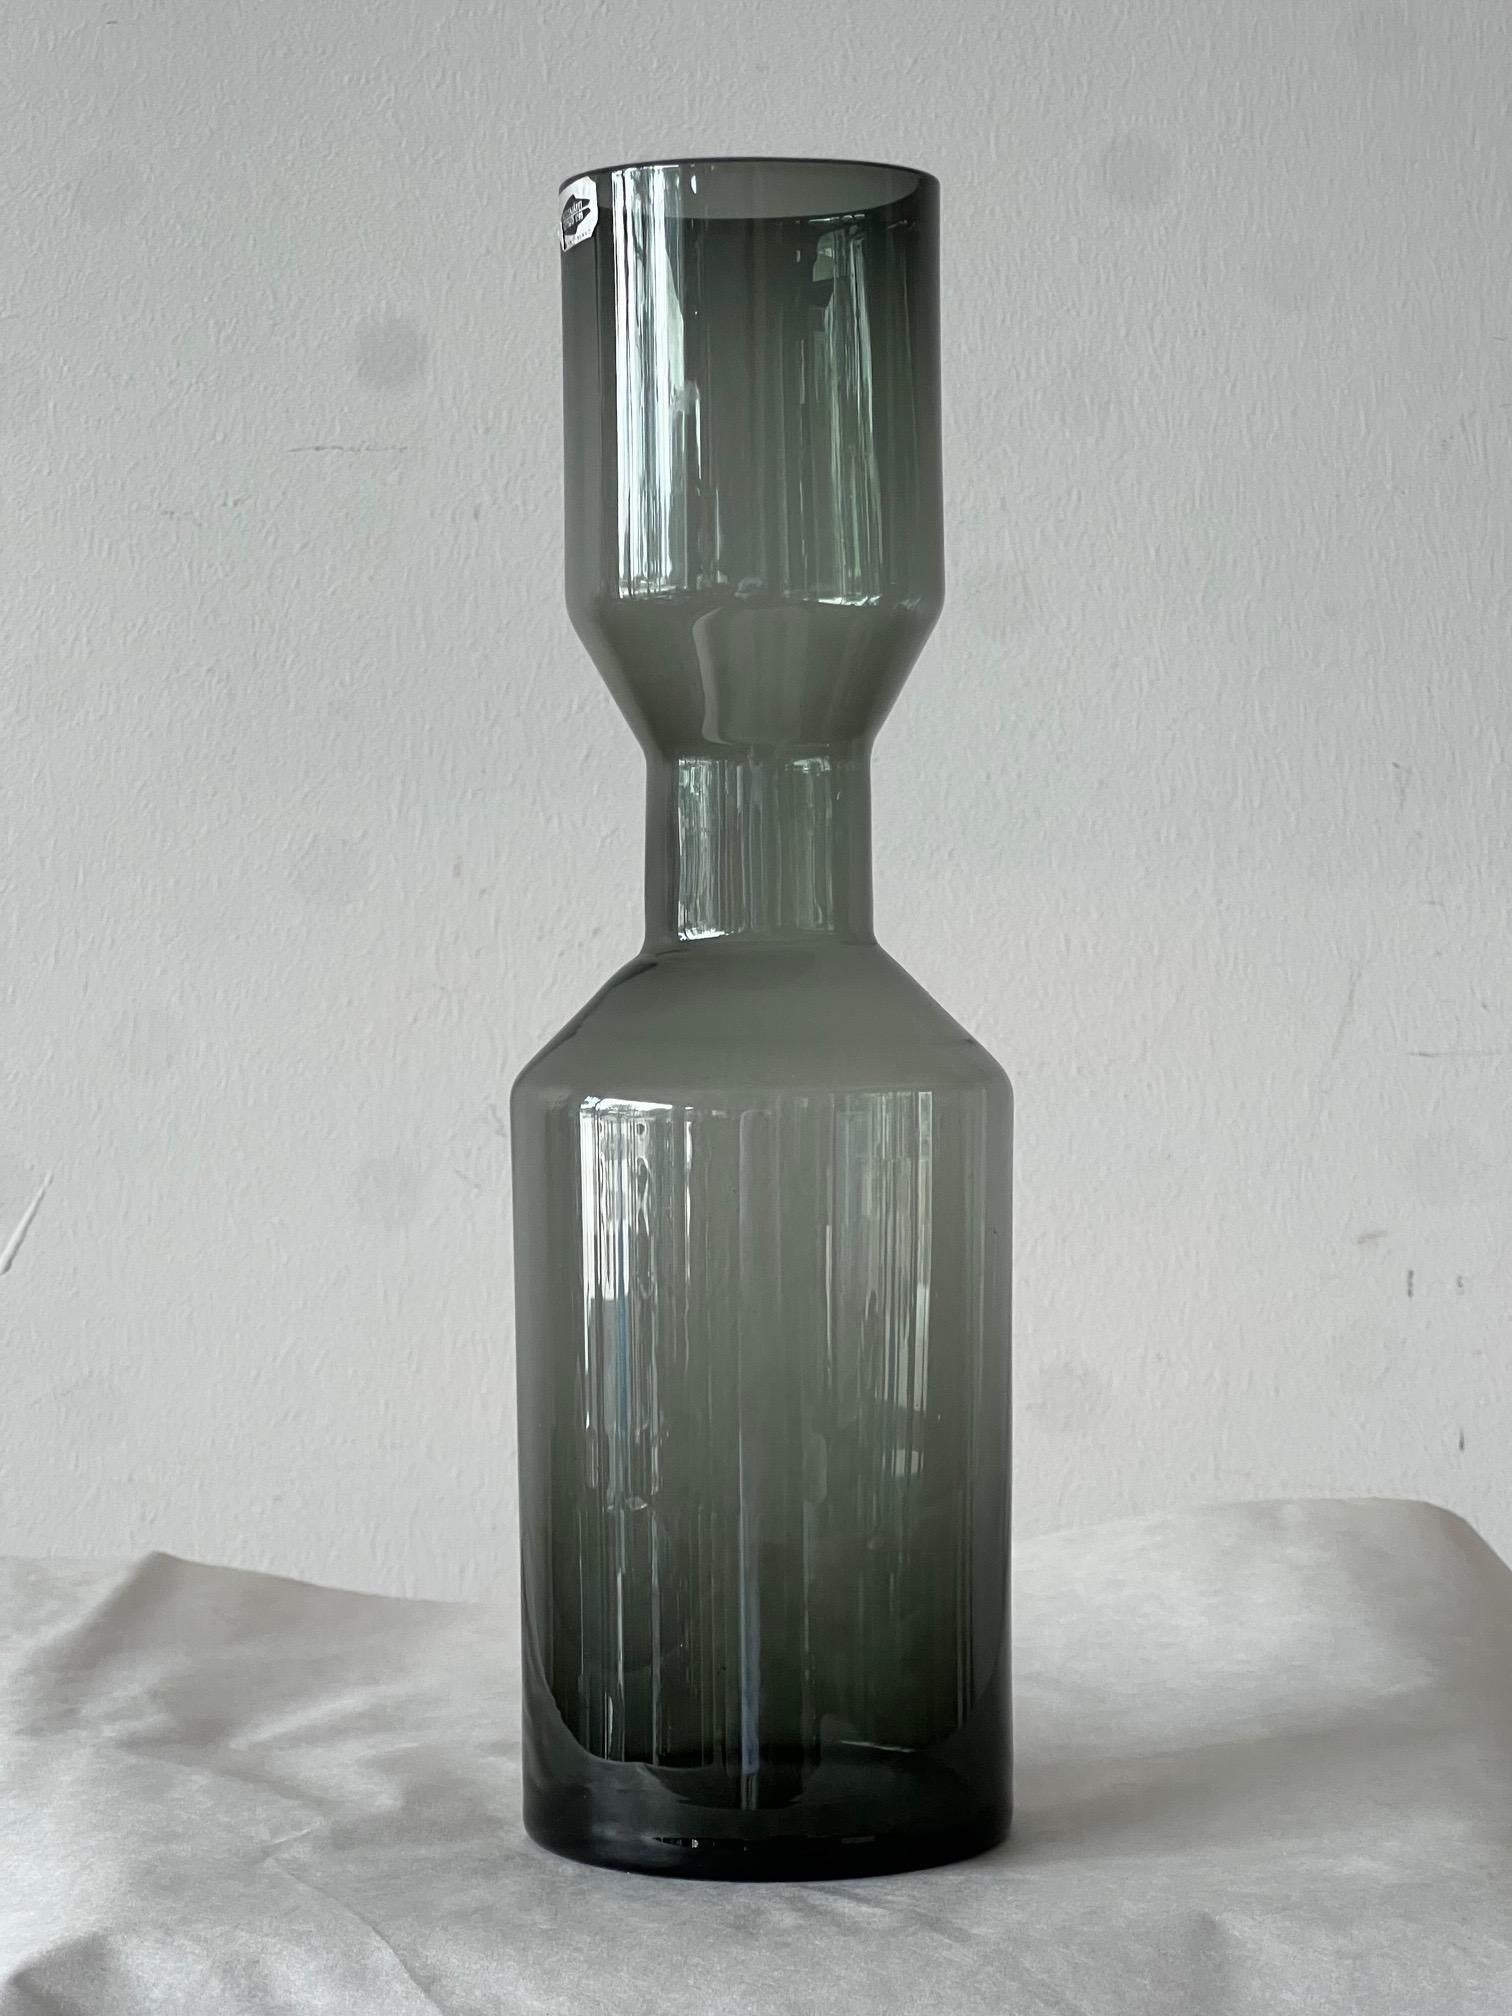 A large and interestingly shaped glass vase by Kaj Franck for Nuutajarvi Notsjo, Finland, ca' 1950's. Smoke glass with original label intact, very good condition.